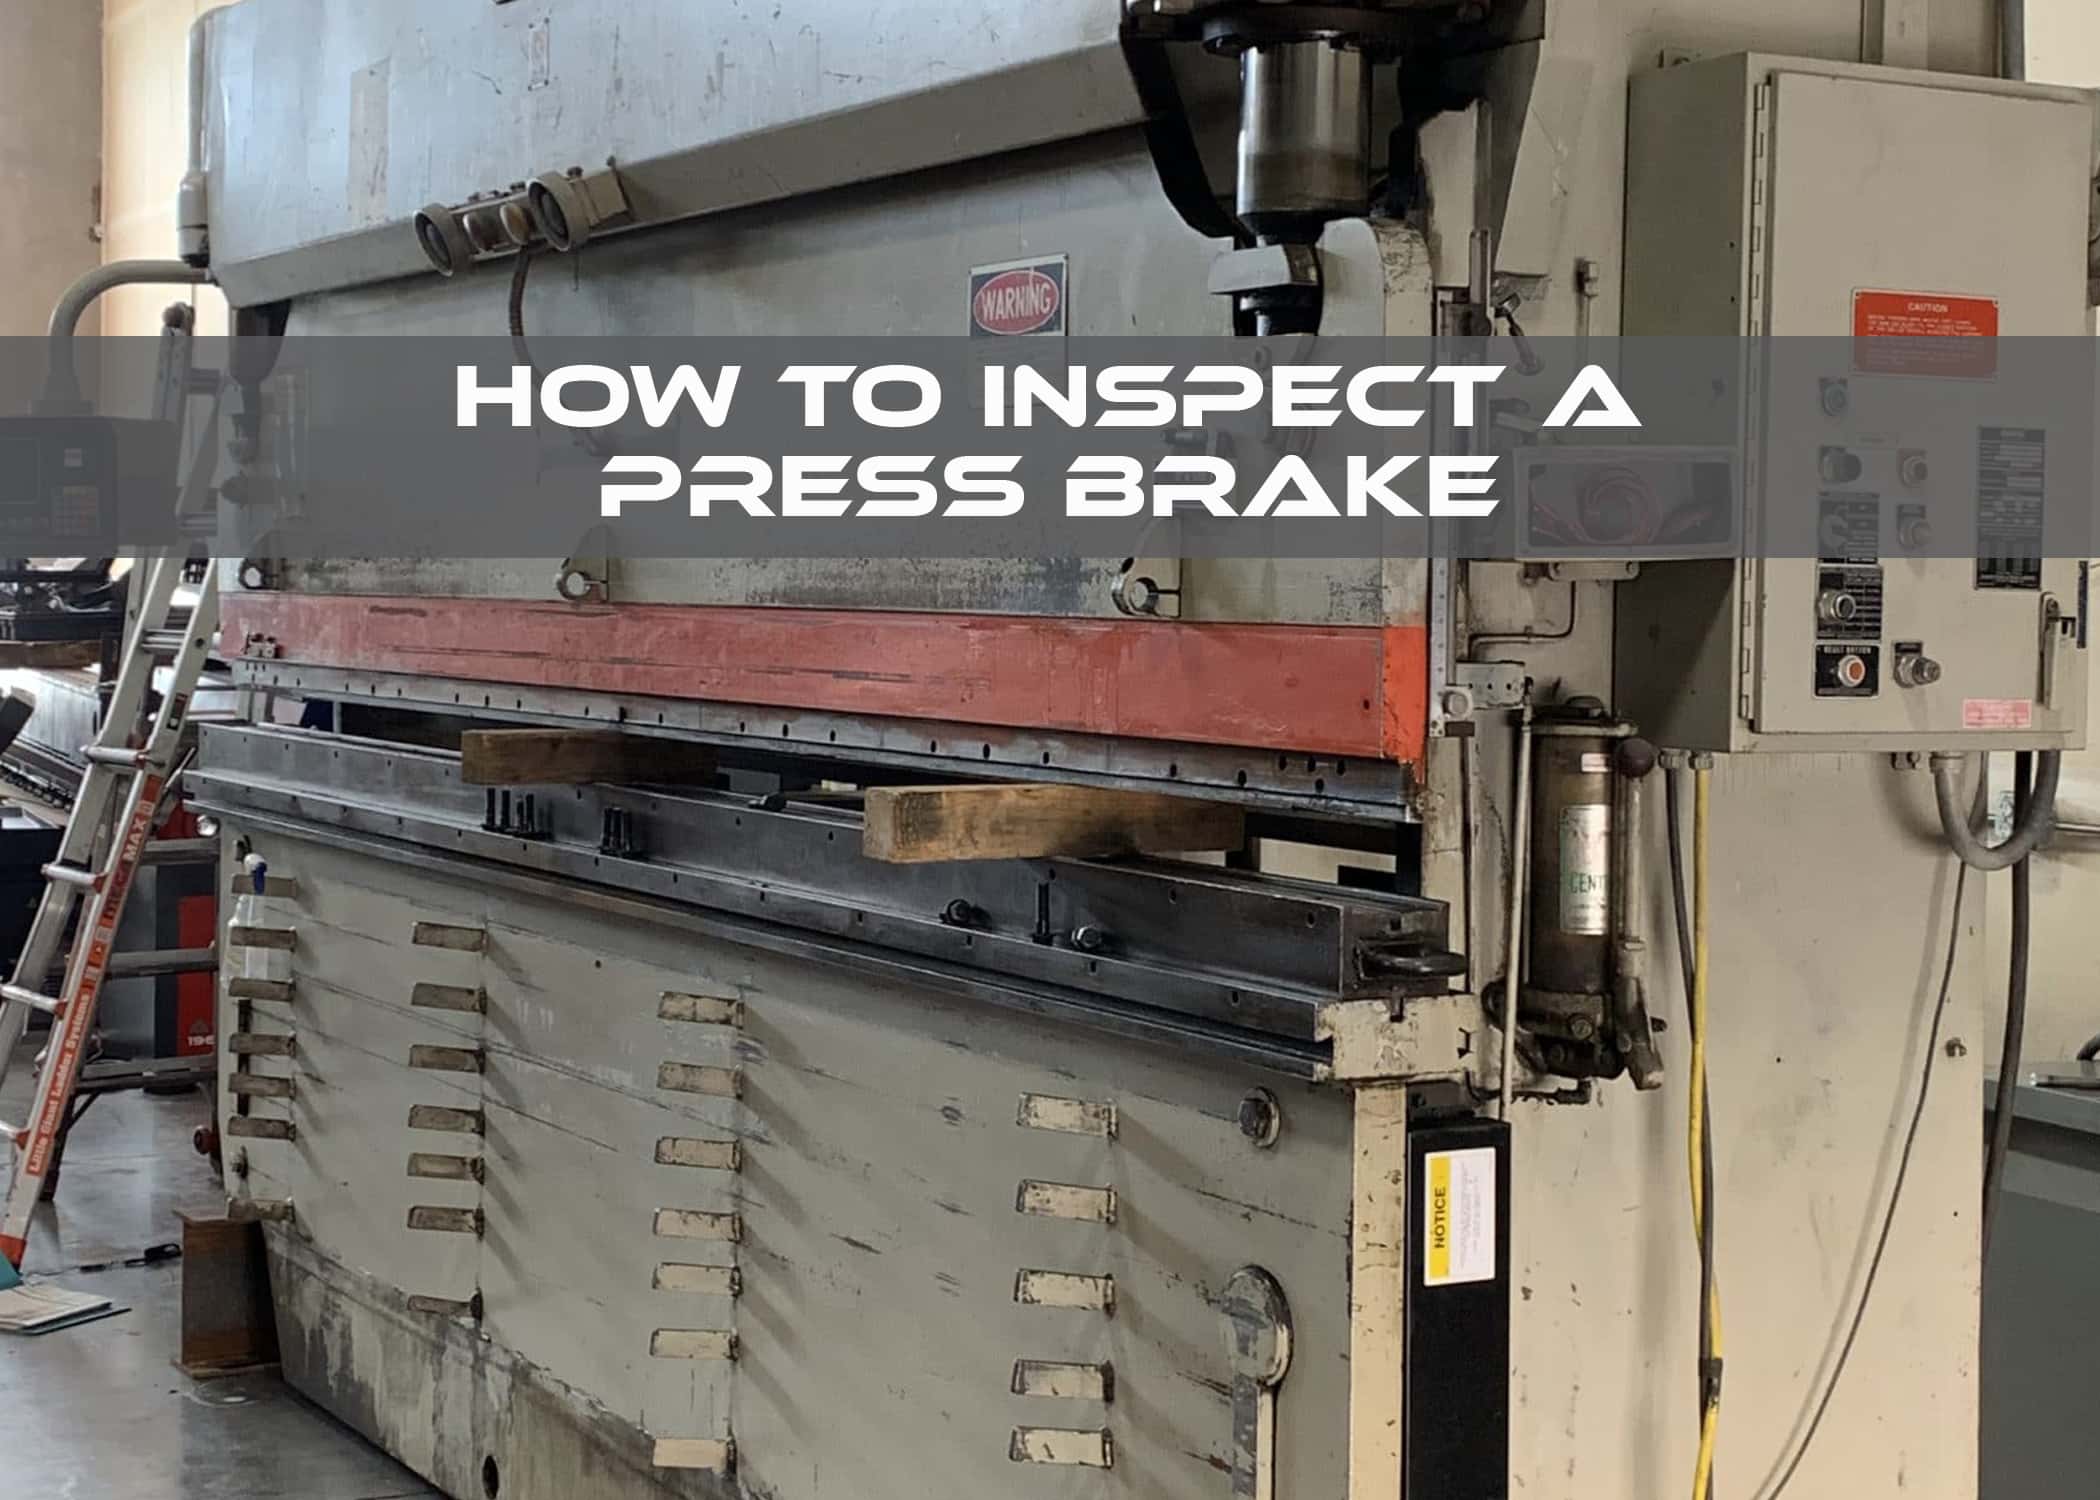 How to Inspect a Press Brake